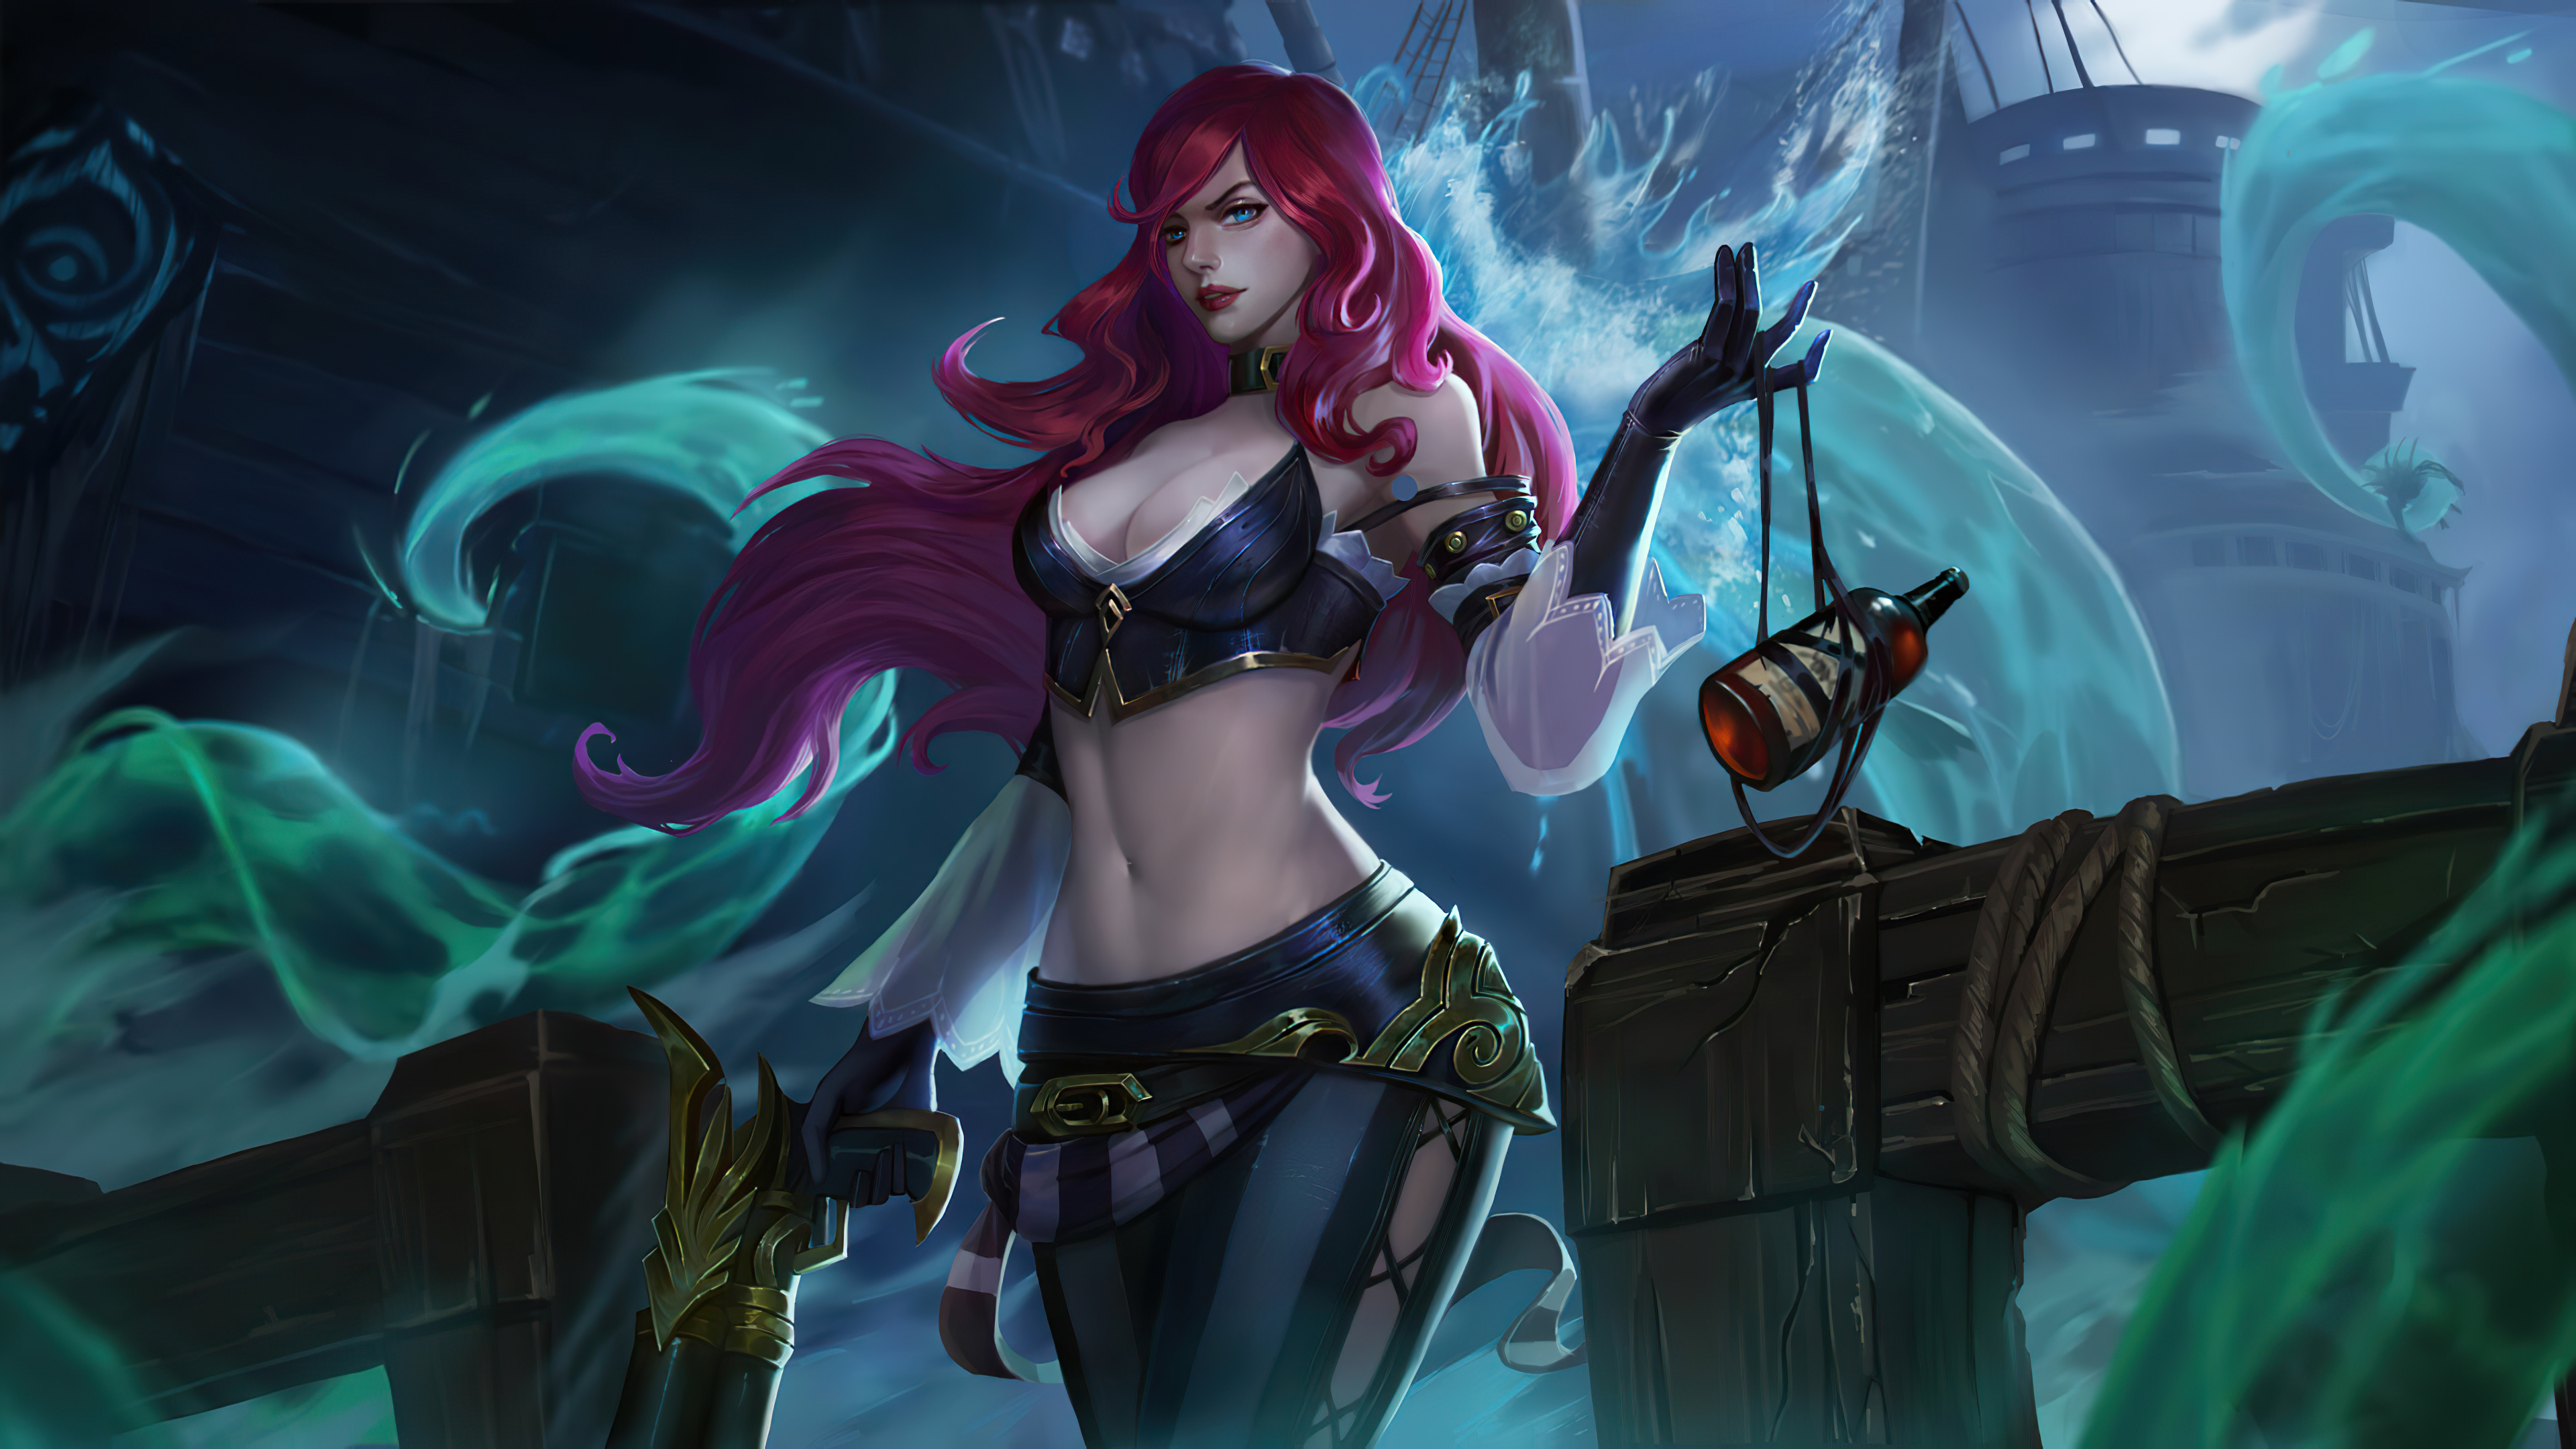 Miss Fortune Wallpaper Hd / Search free miss fortune wallpapers on zedge an...